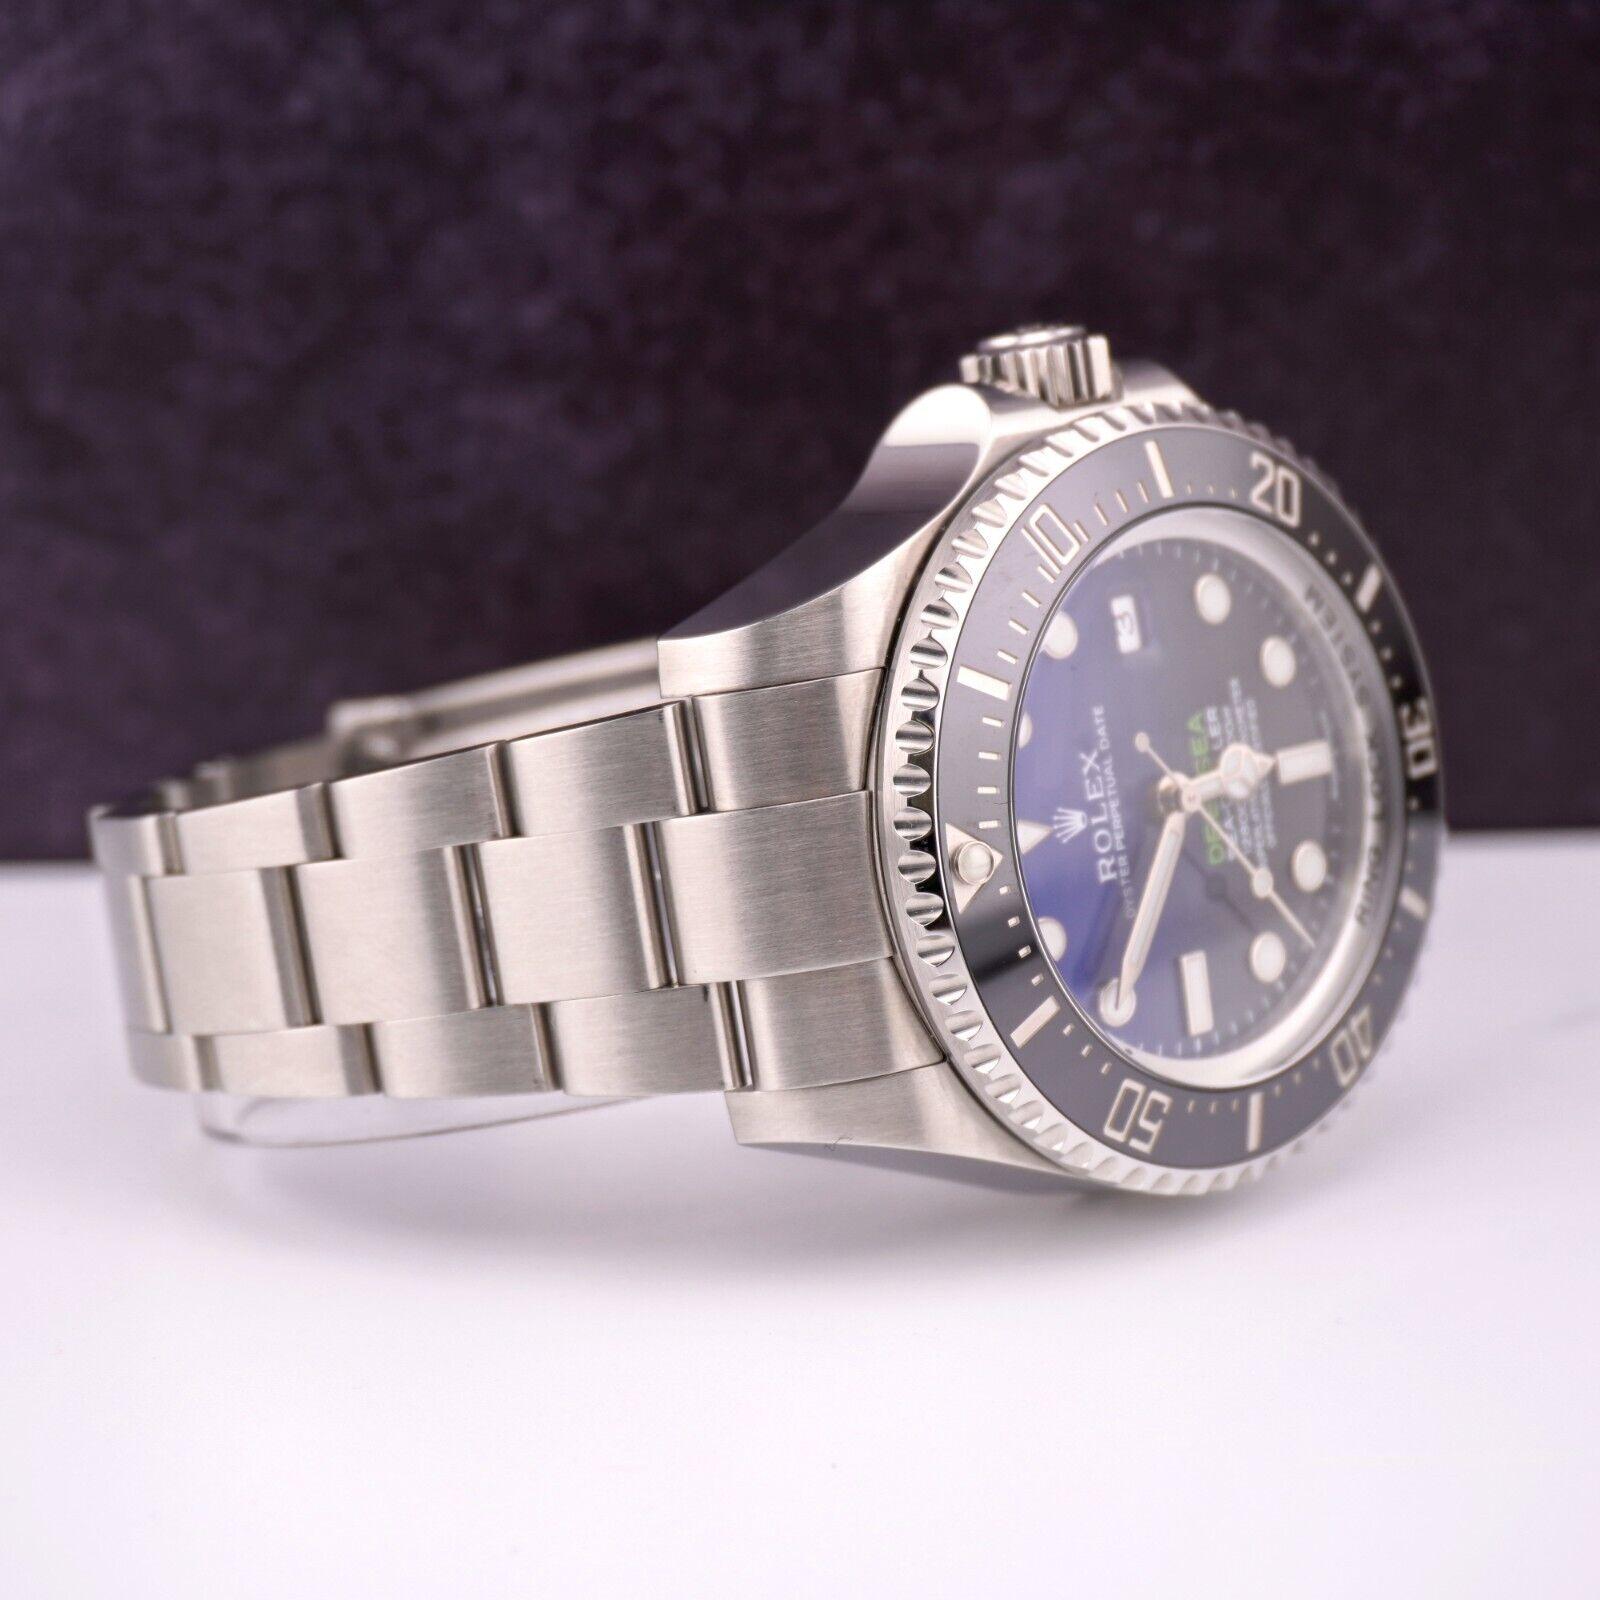 Rolex Deep Sea-Dweller Date 44mm Watch

Pre-owned w/ Original Box & Card
100% Authentic Authenticity Card
Condition - (Excellent Condition) - See Pics
Watch Reference - 116660
Model - Deep Sea-Dweller
Dial Color - Blue, Black
Material - Stainlees